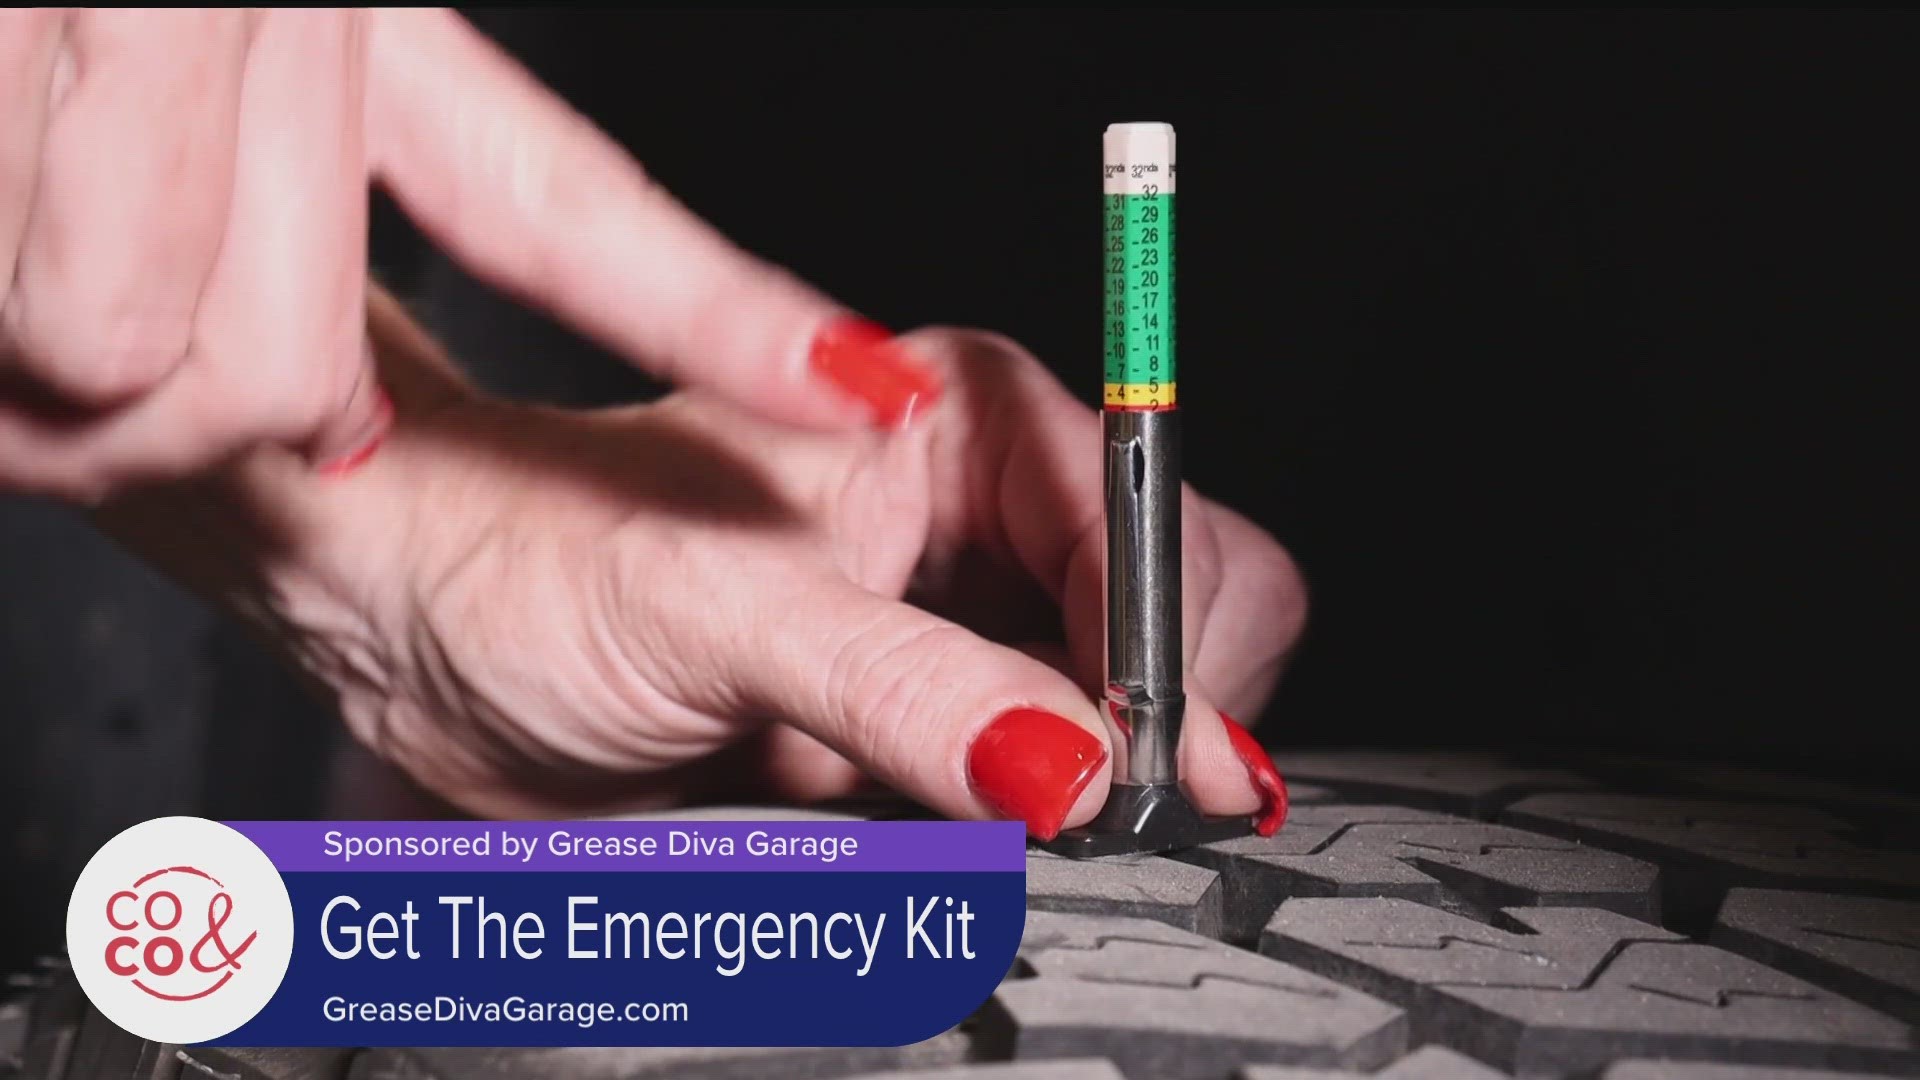 Get your car serviced by Grease Diva Garage and pick up your own emergency kit to feel empowered on the road! **PAID CONTENT**